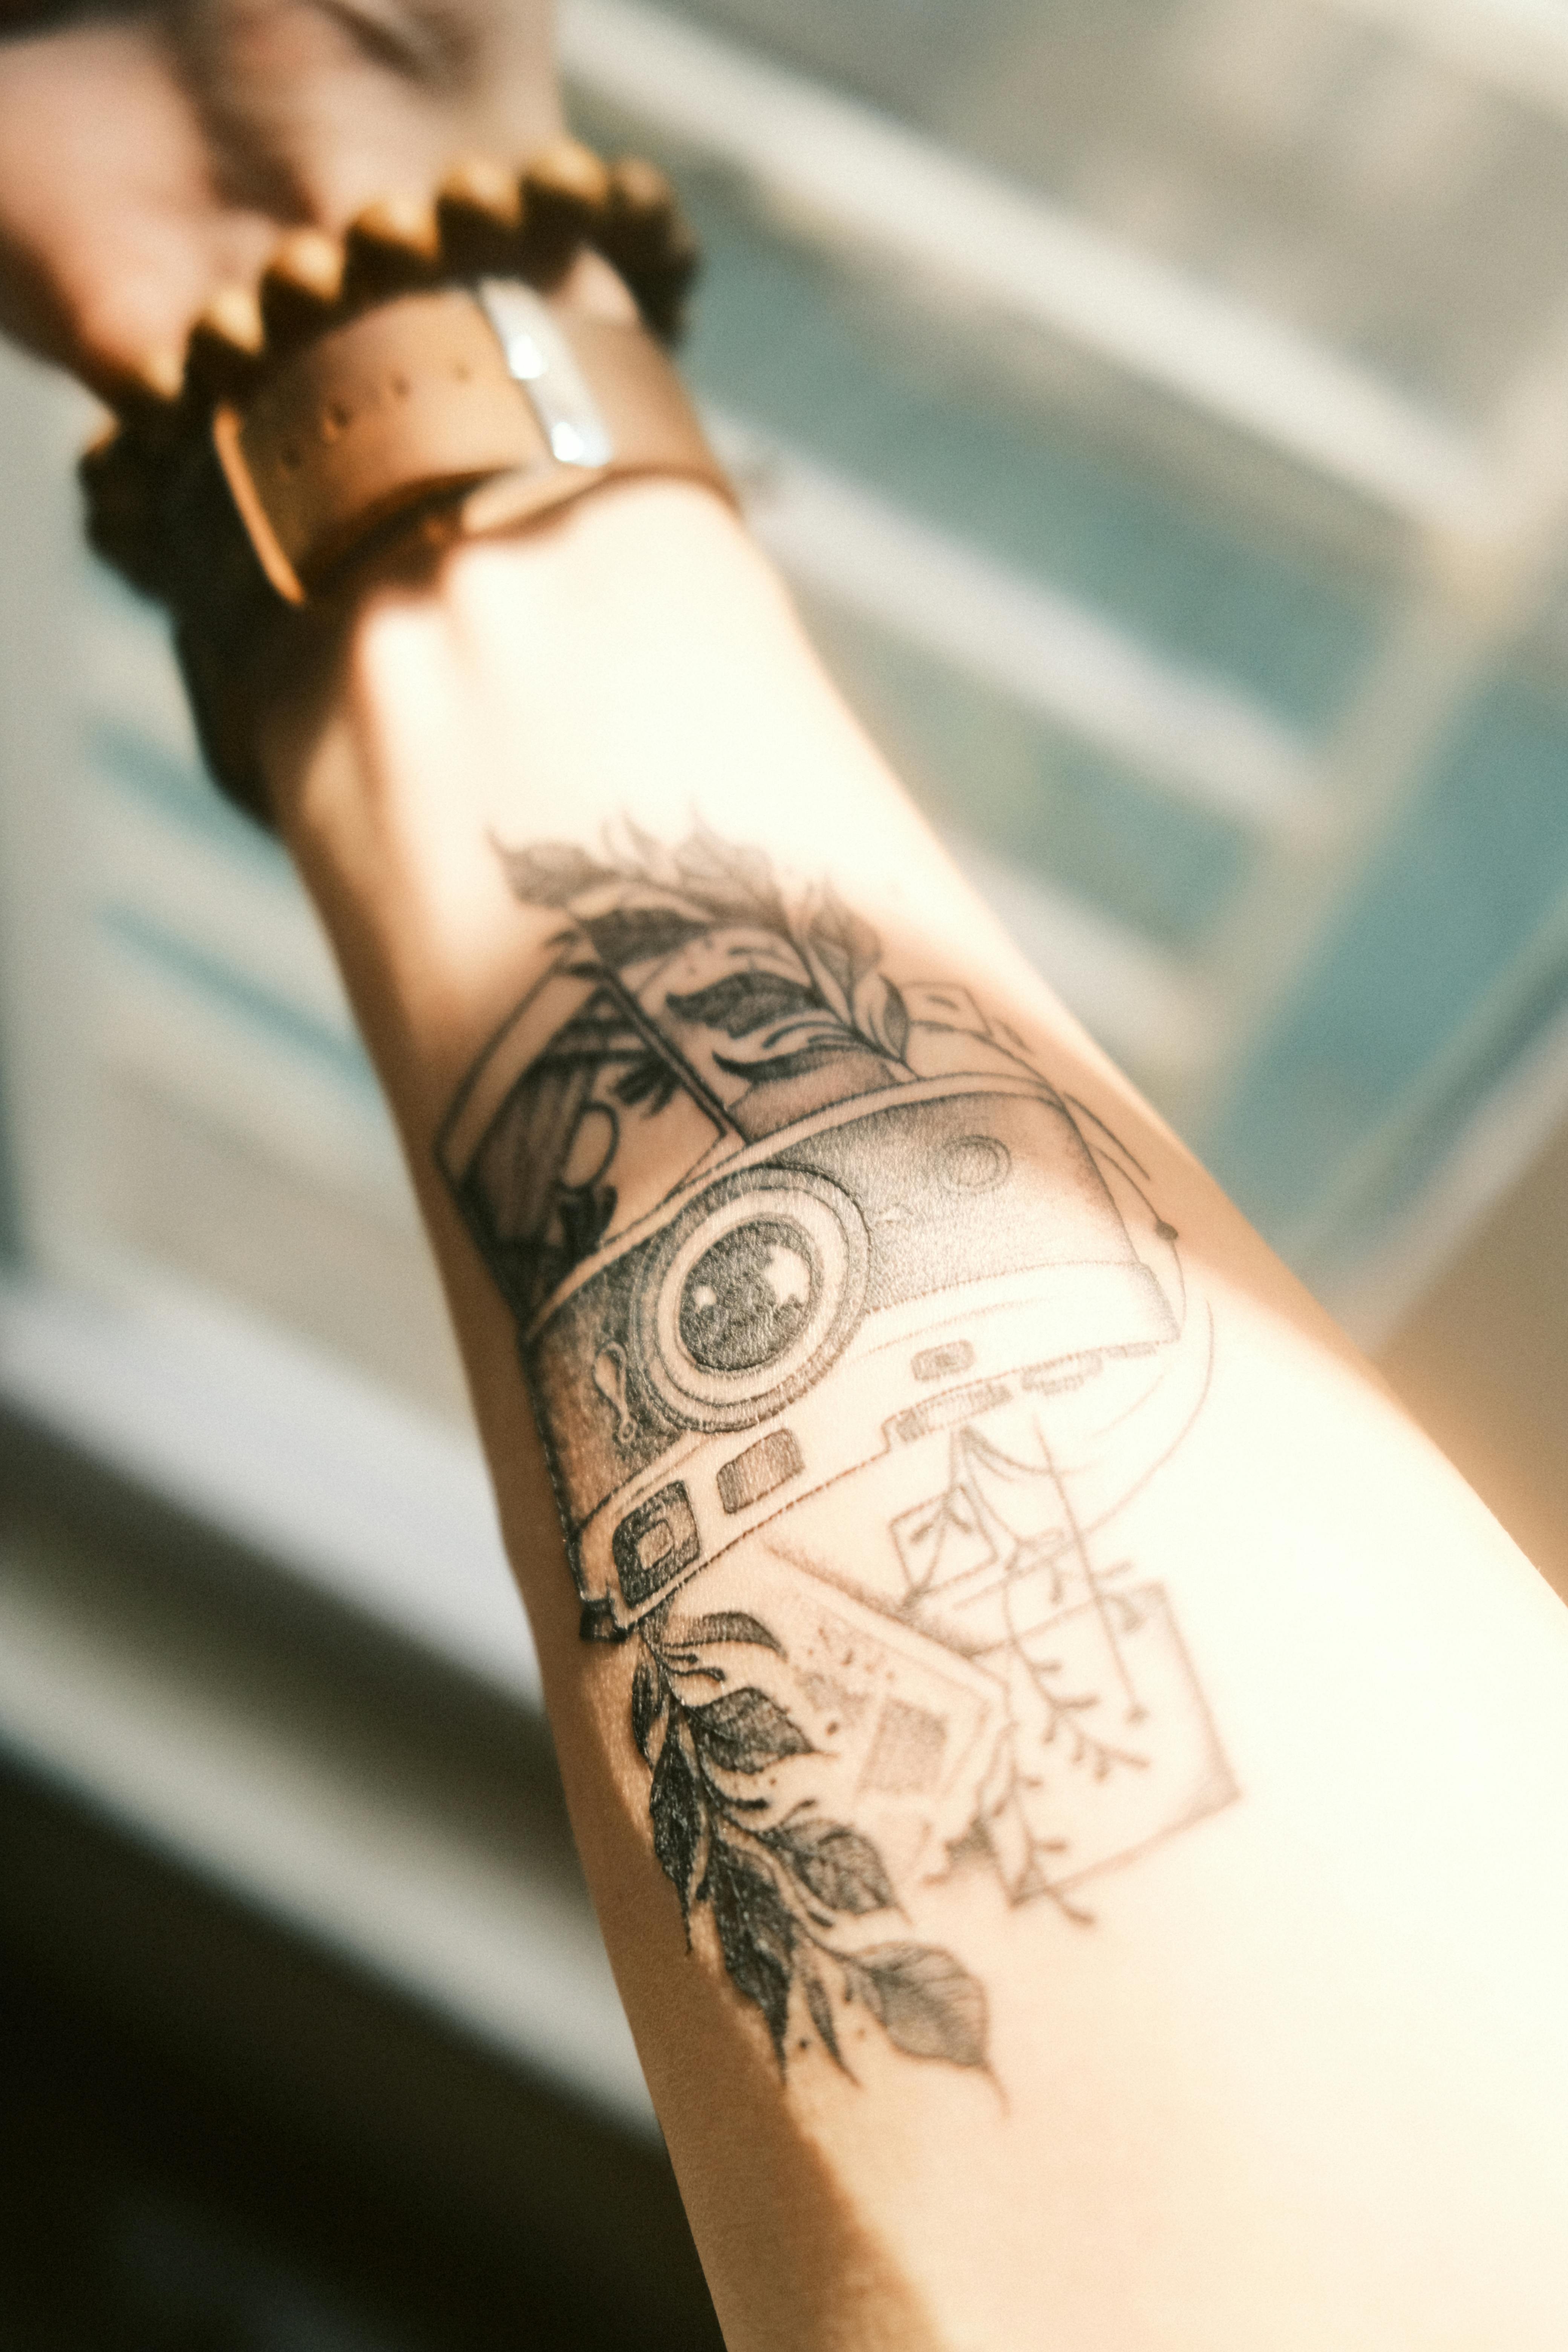 Is it possible to add a second line of text to a tattoo? - Quora